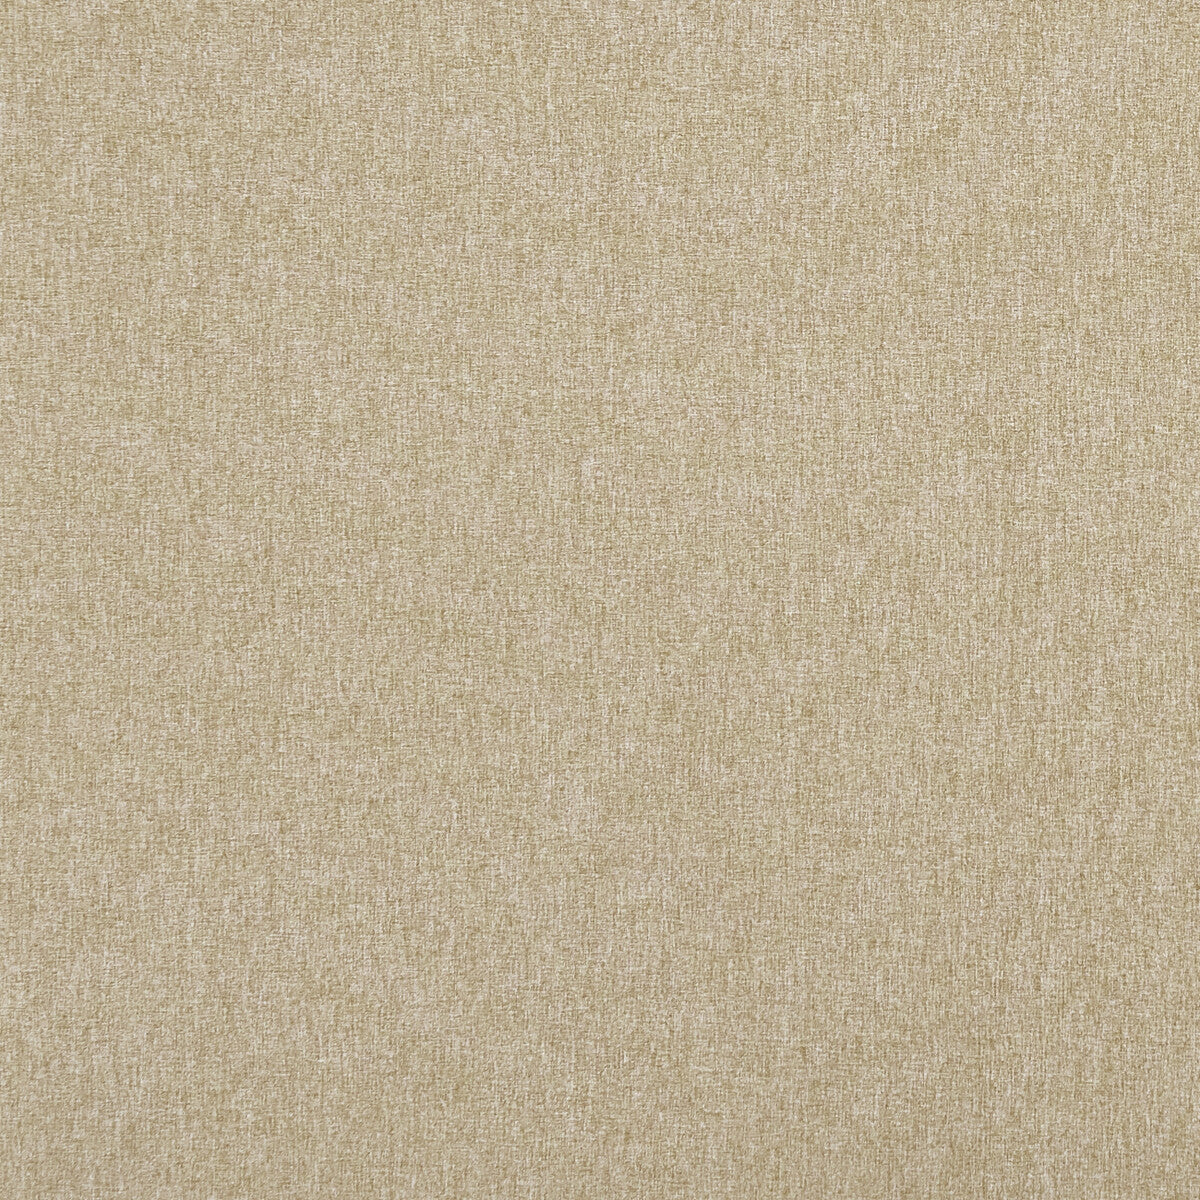 Highlander fabric in coffee color - pattern F0848/07.CAC.0 - by Clarke And Clarke in the Clarke &amp; Clarke Highlander collection